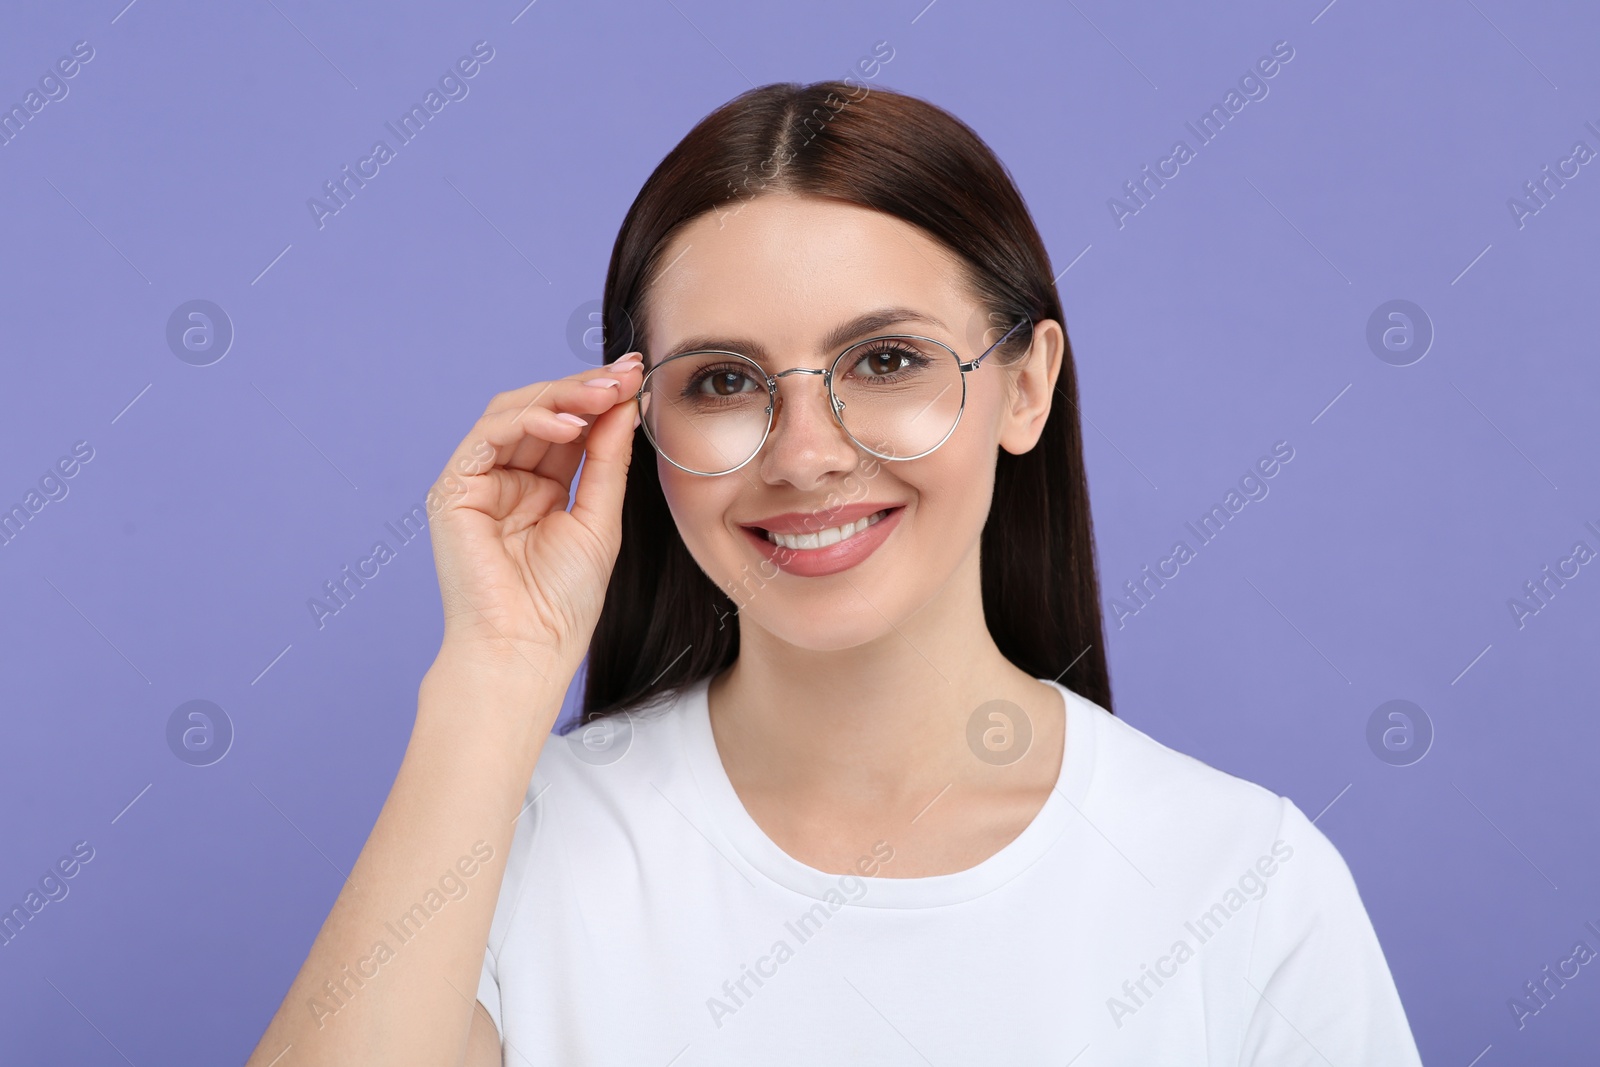 Photo of Portrait of smiling woman in stylish eyeglasses on violet background